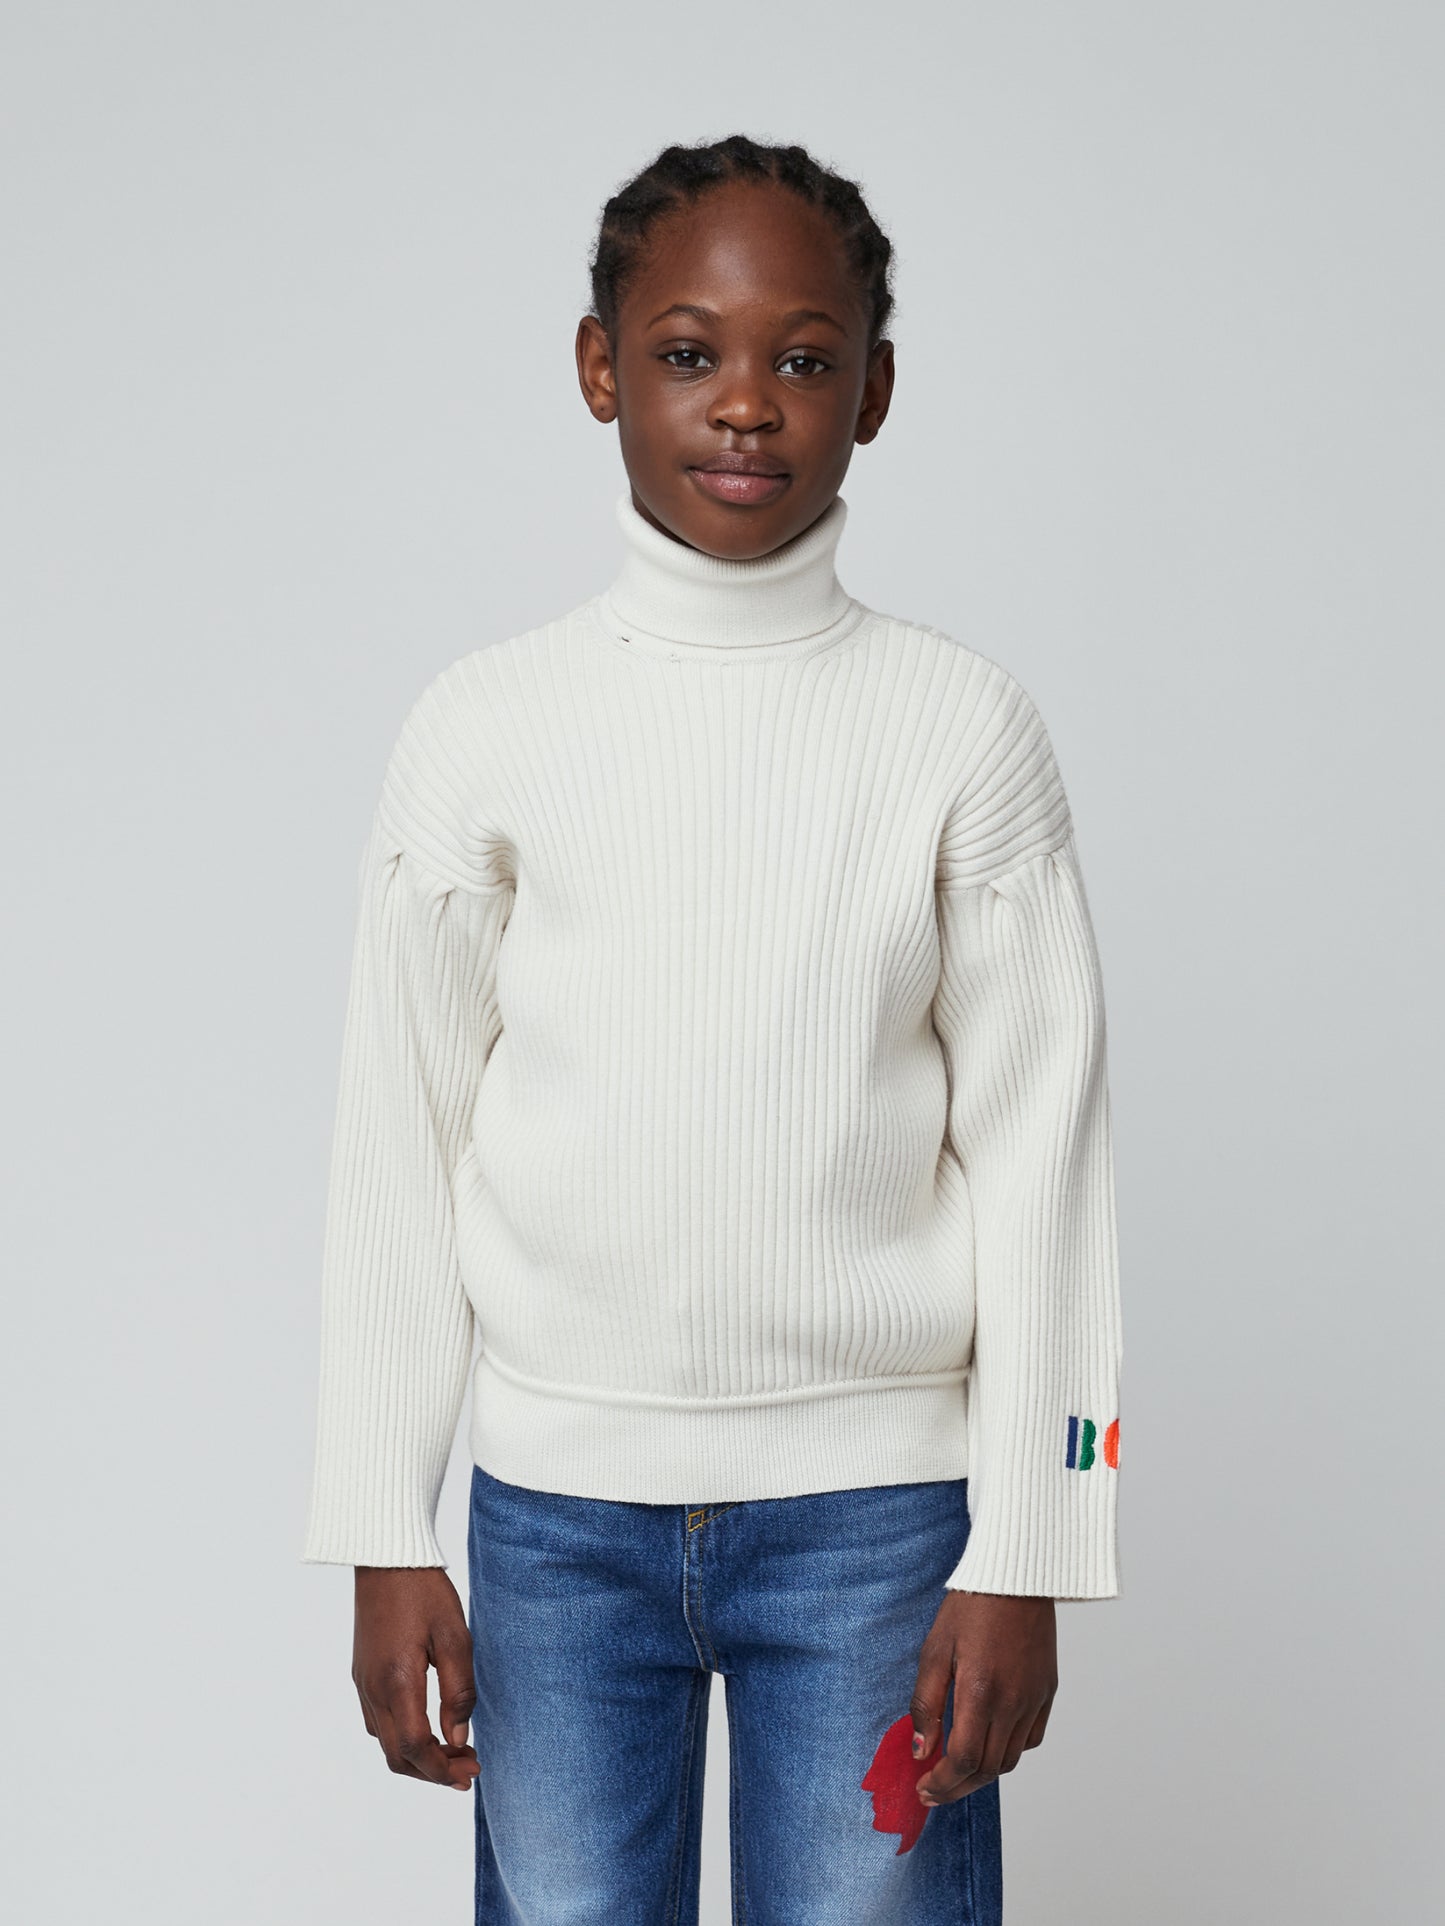 Up Is Down turtle neck jumper